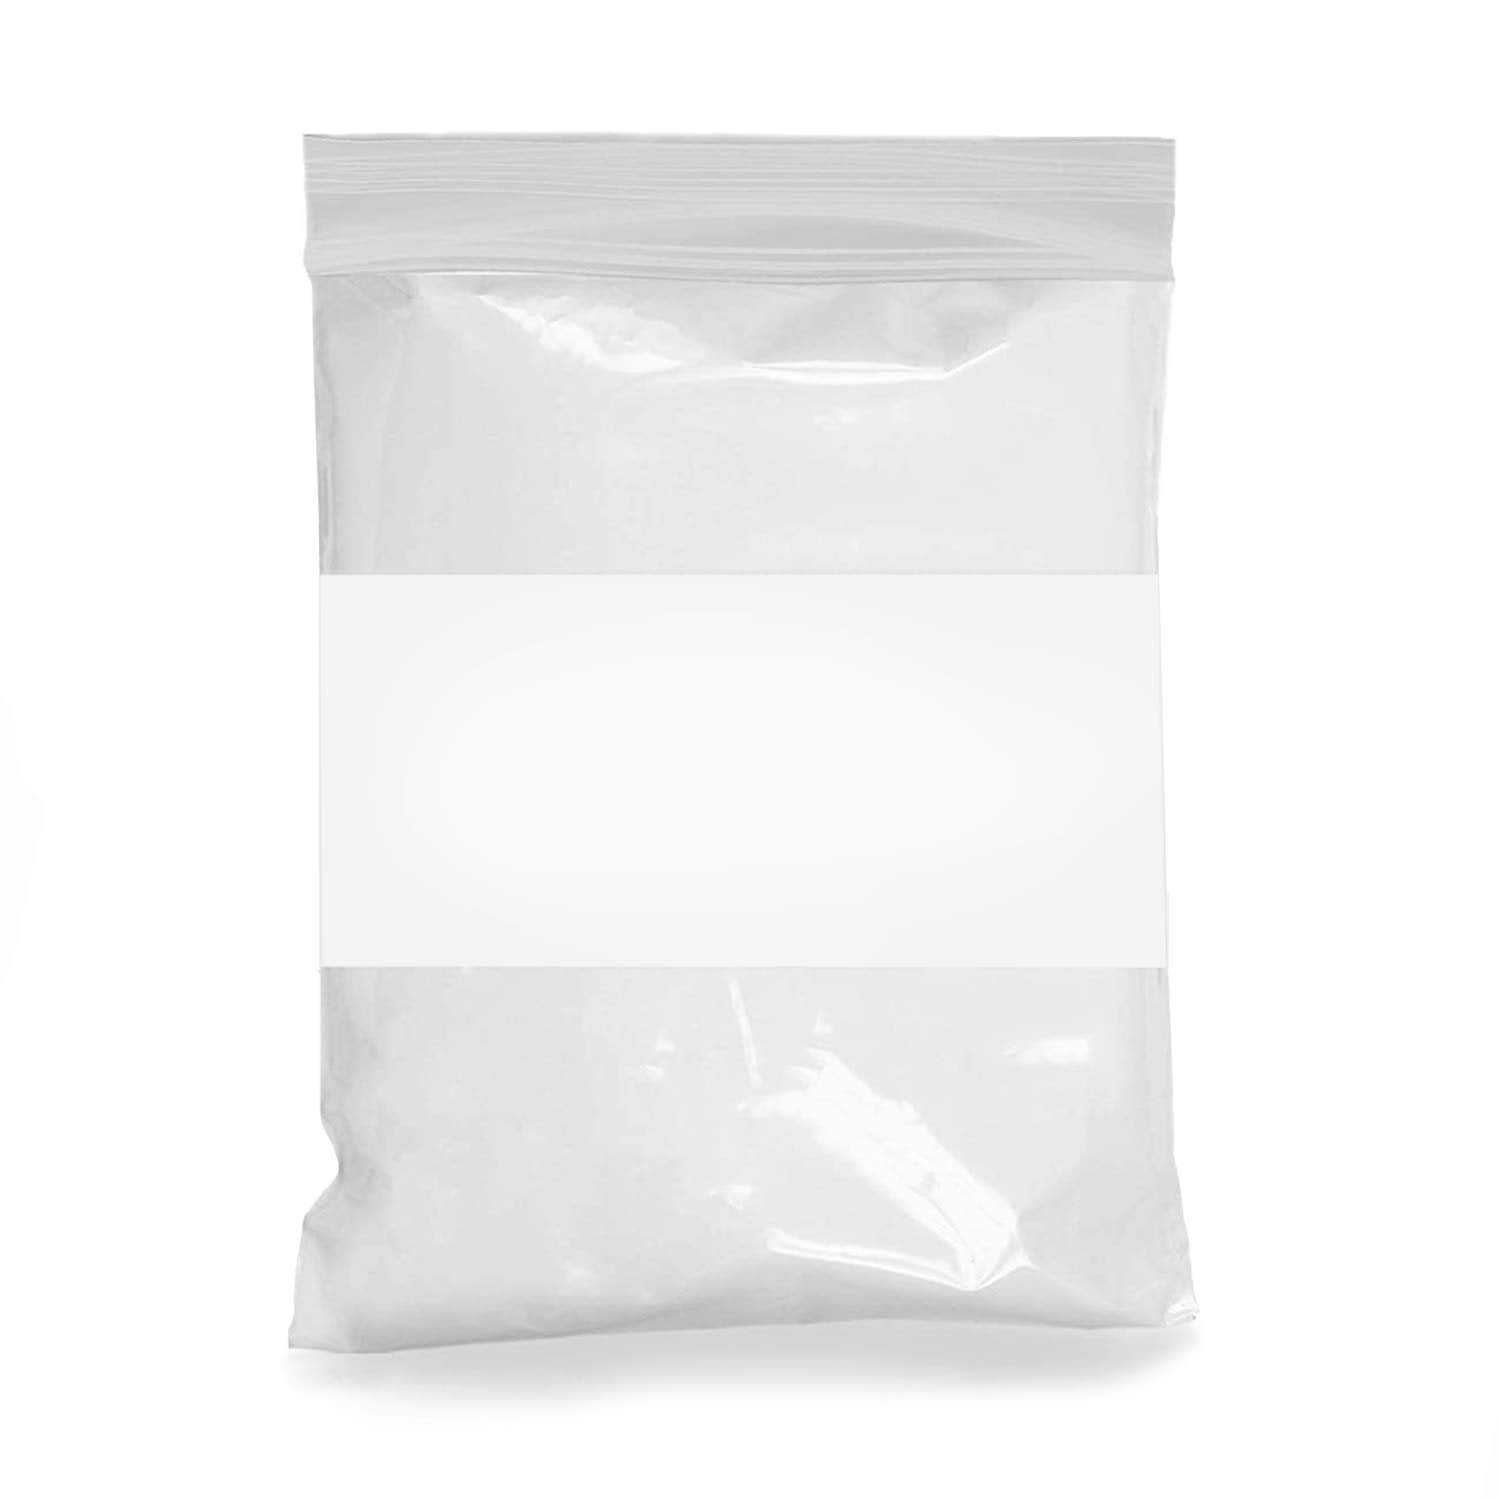 Clear 4 x 8 Inch 1000 Pack 4 Mil Resealable Zipper Bags Small Plastic Bag 